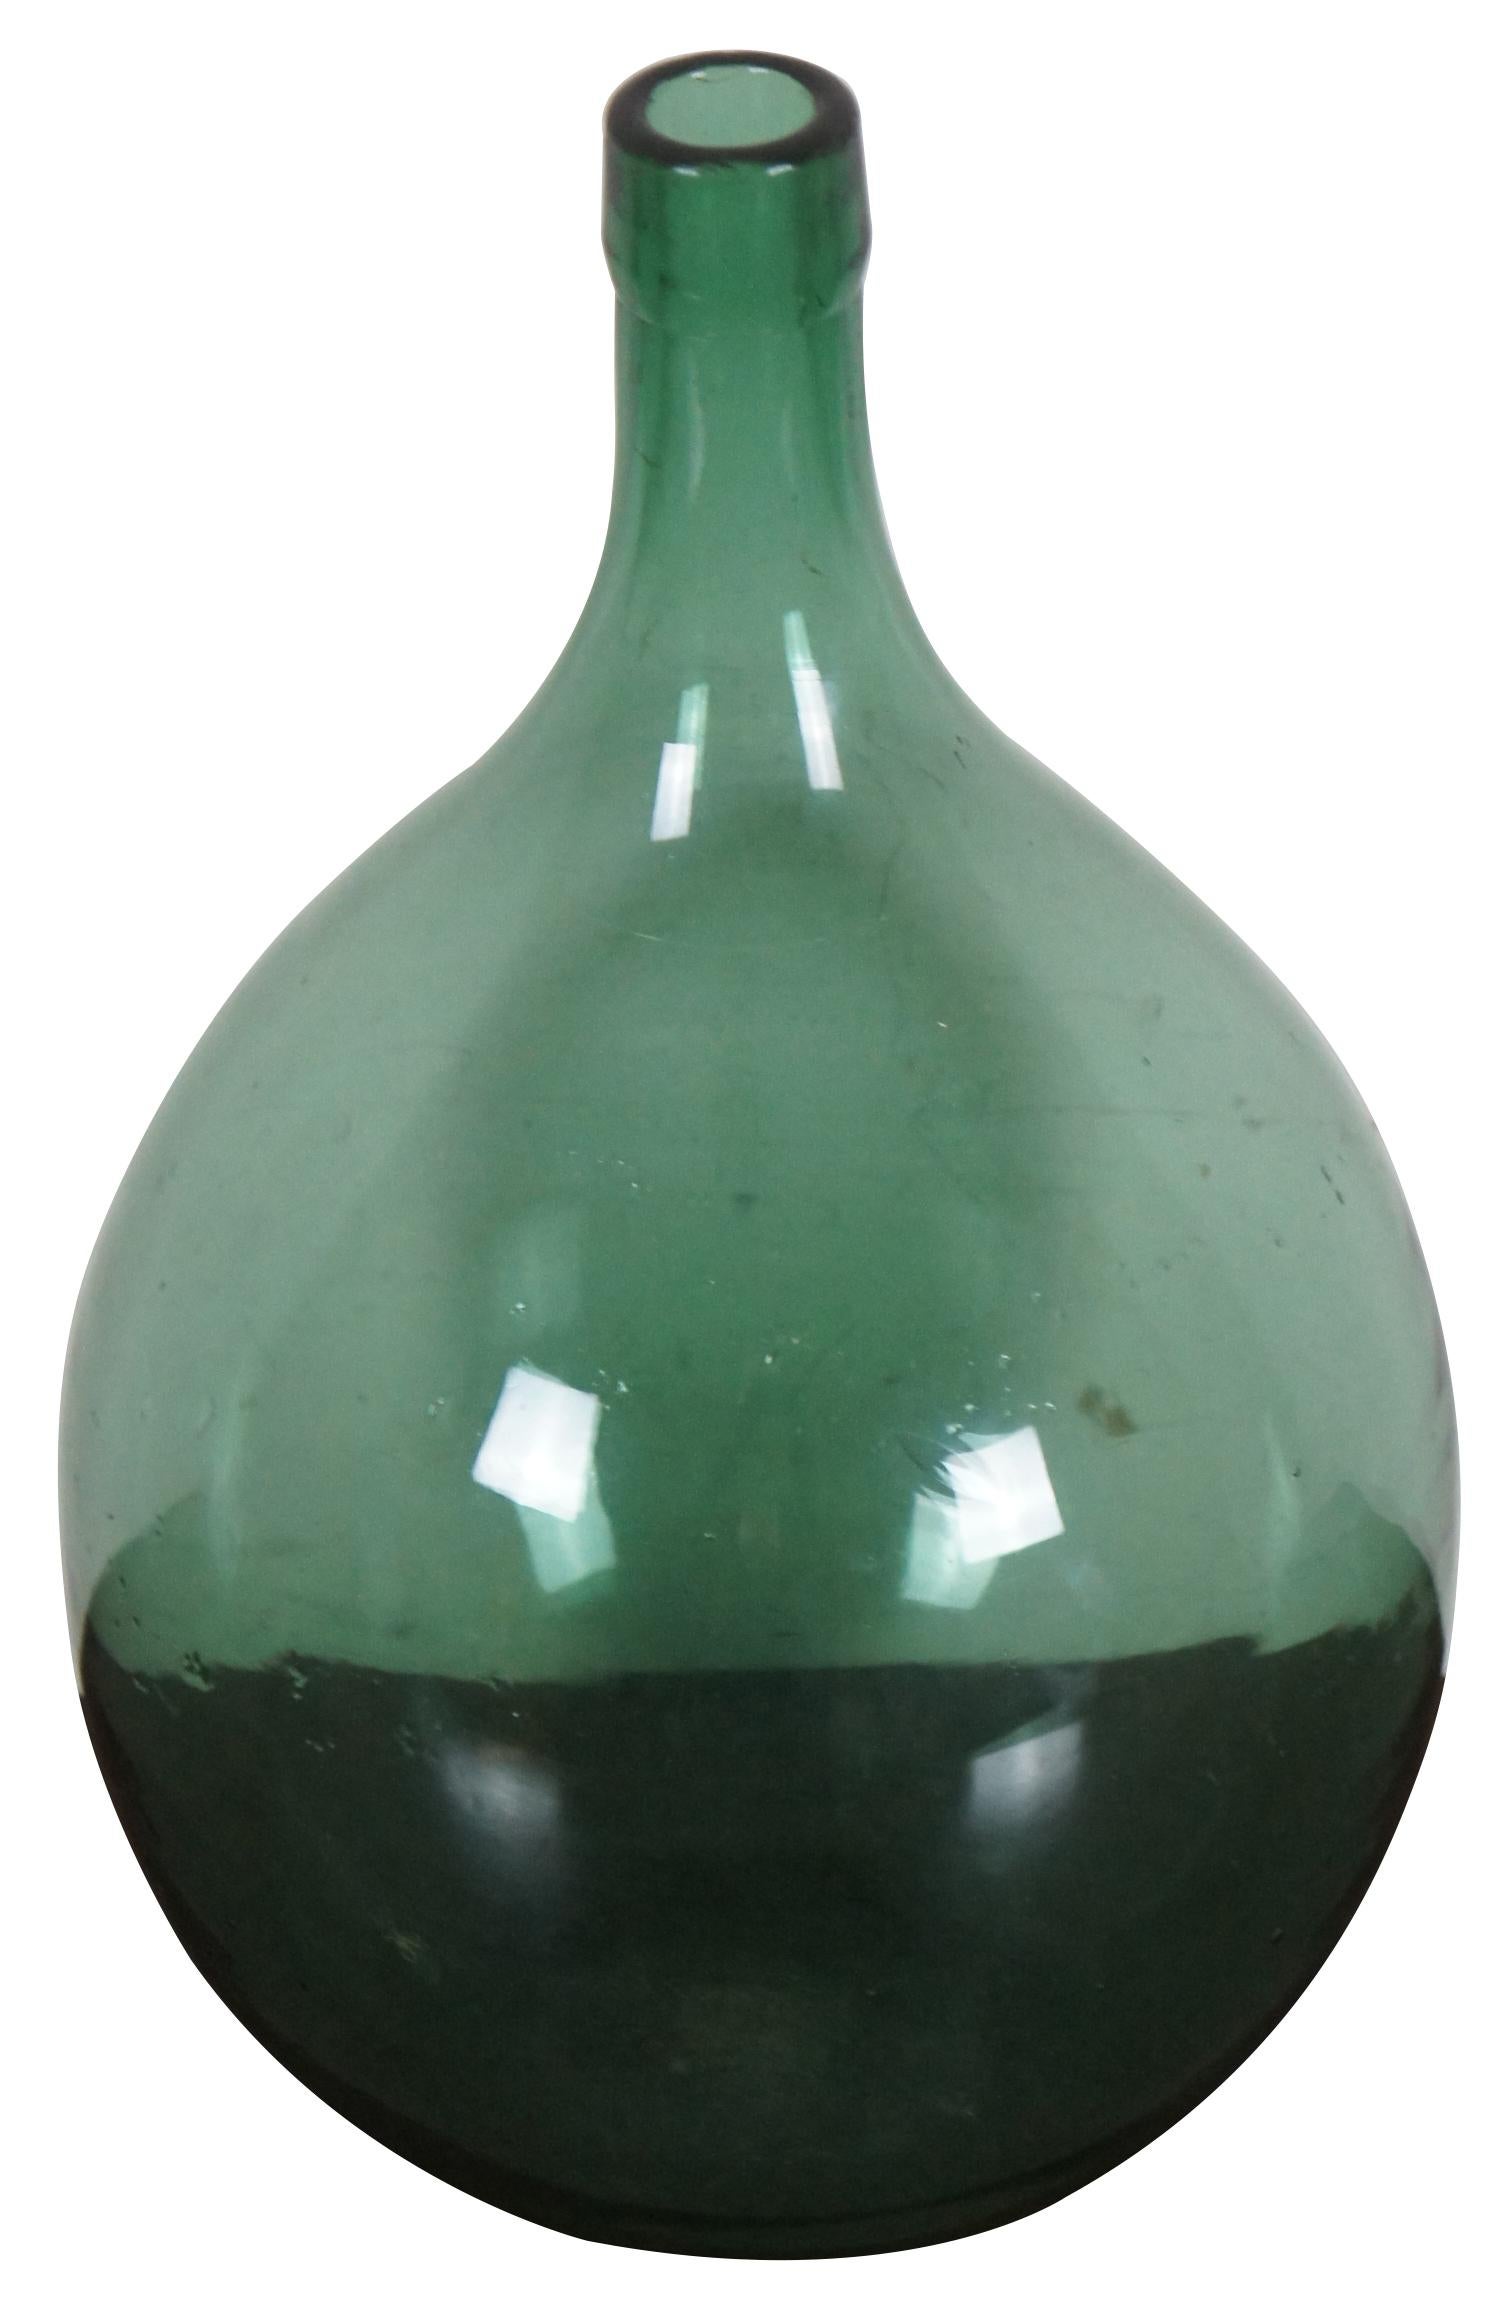 Antique hand blown French demijohn or bonbonne. Beautifully shaped and brightly colored green glass bottle with polished pontil bottom. Originally used for storing wine and spirits, demijohns were in wide use from the 1700s to the early 1900s.